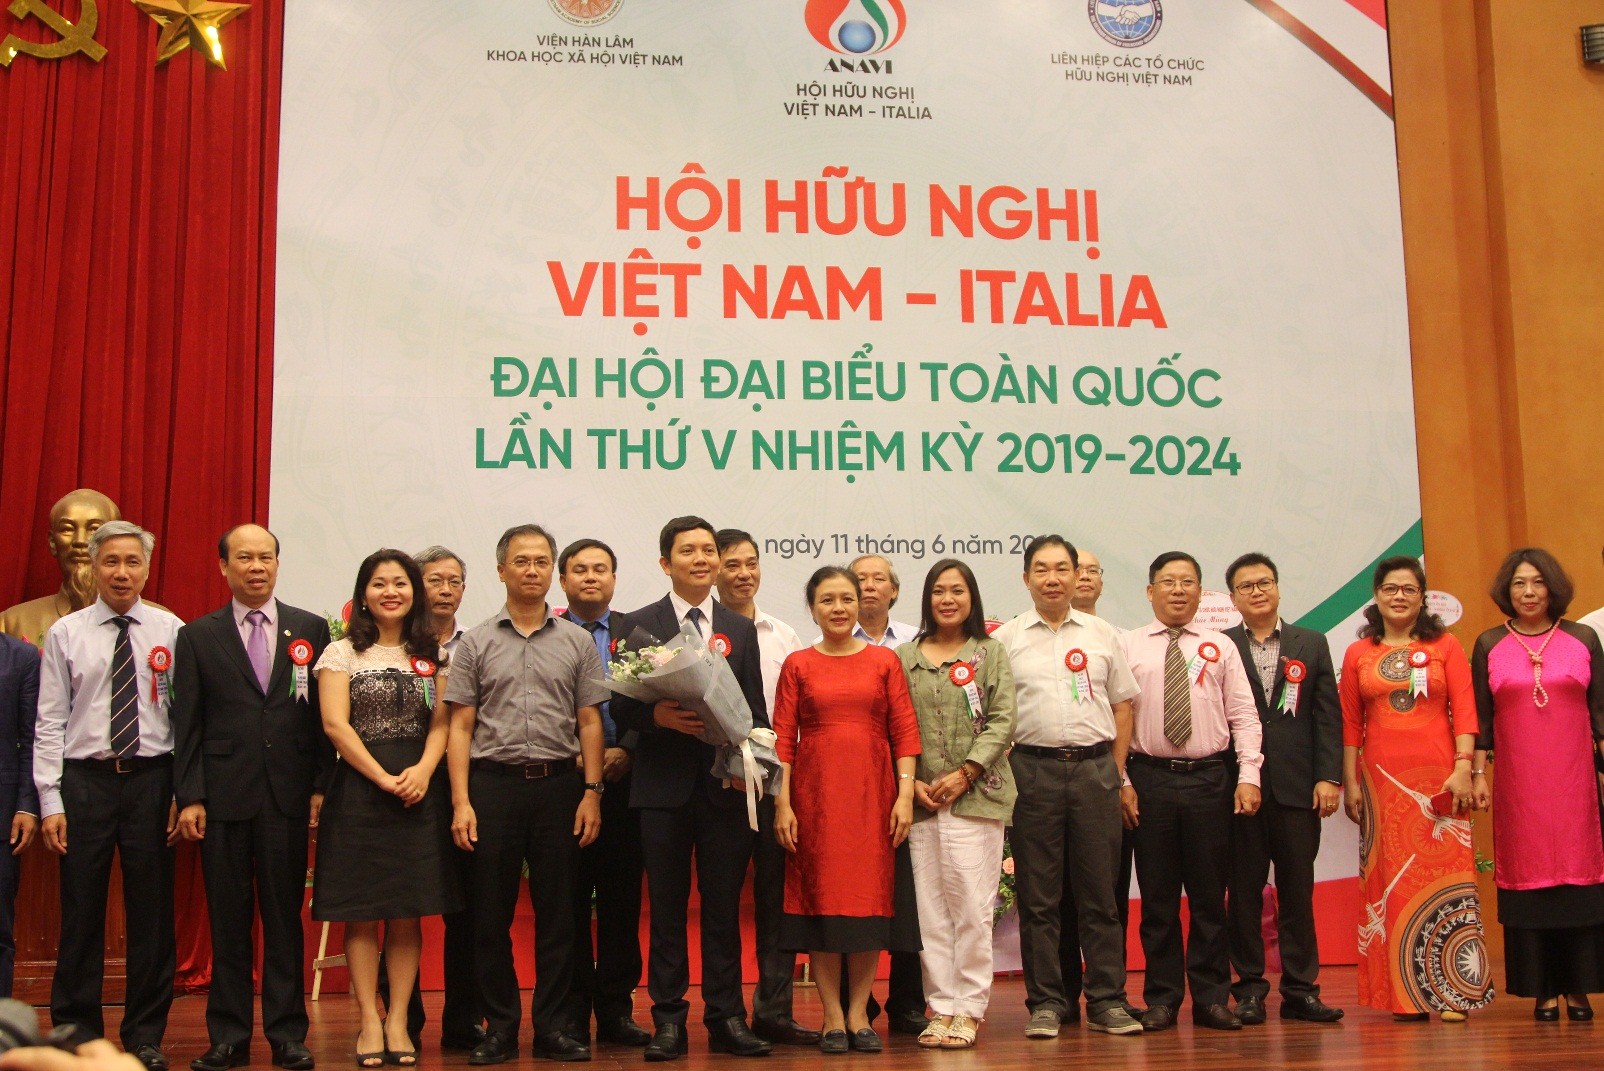 Directors Board of Vietnam Museum of Ethnology presented congratulation flowers to Assoc.Prof.Dr. Bui Nhat Quang at the Congress